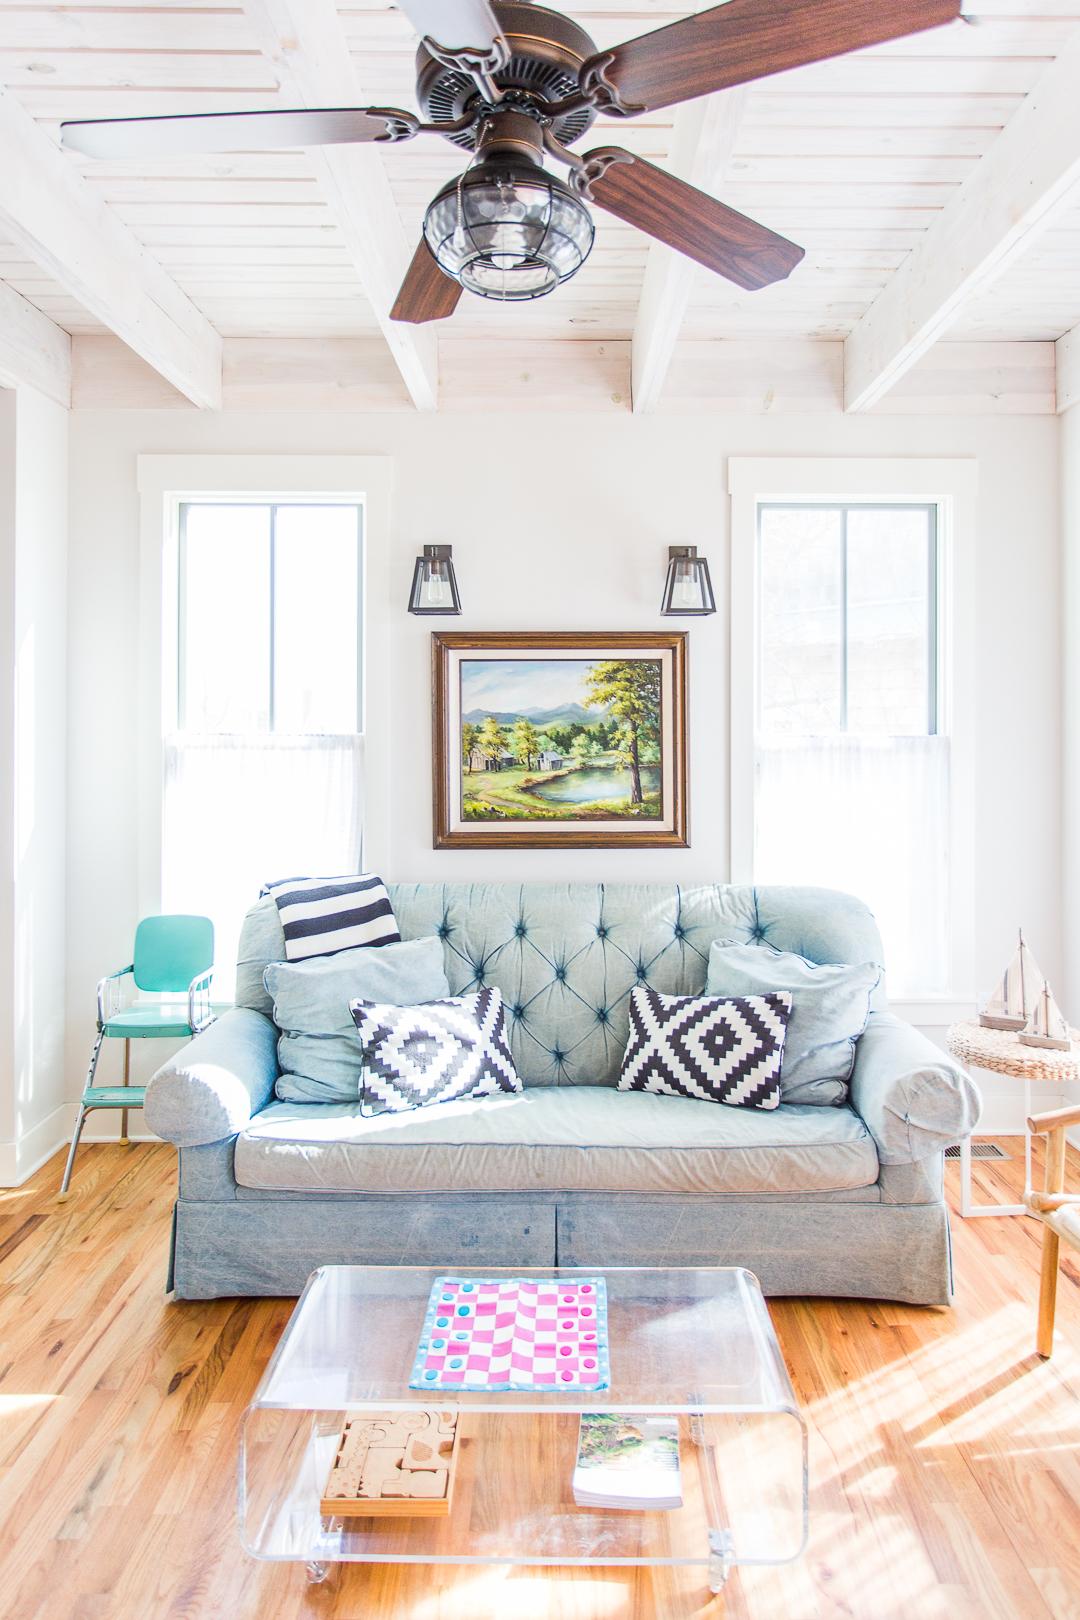 Check out today's home tour of this charming cottage in picturesque Carlton Landing on the shores of Lake Eufaula. This tiny home packs a major punch with smart design for small space living. With loads of vintage style, shiplap, a built in bunk room, and wood floors galore, you'll find plenty to inspire your next home design project. See the full tour at www.pencilshavingsstudio.com #newurbanism #tinyhouse #smallspaces #cottageliving #bungalow #southernliving #curbappeal #lakehouseliving #lakehouse #coastalliving #coastaldecor #eclecticstyle #eclecticdecor